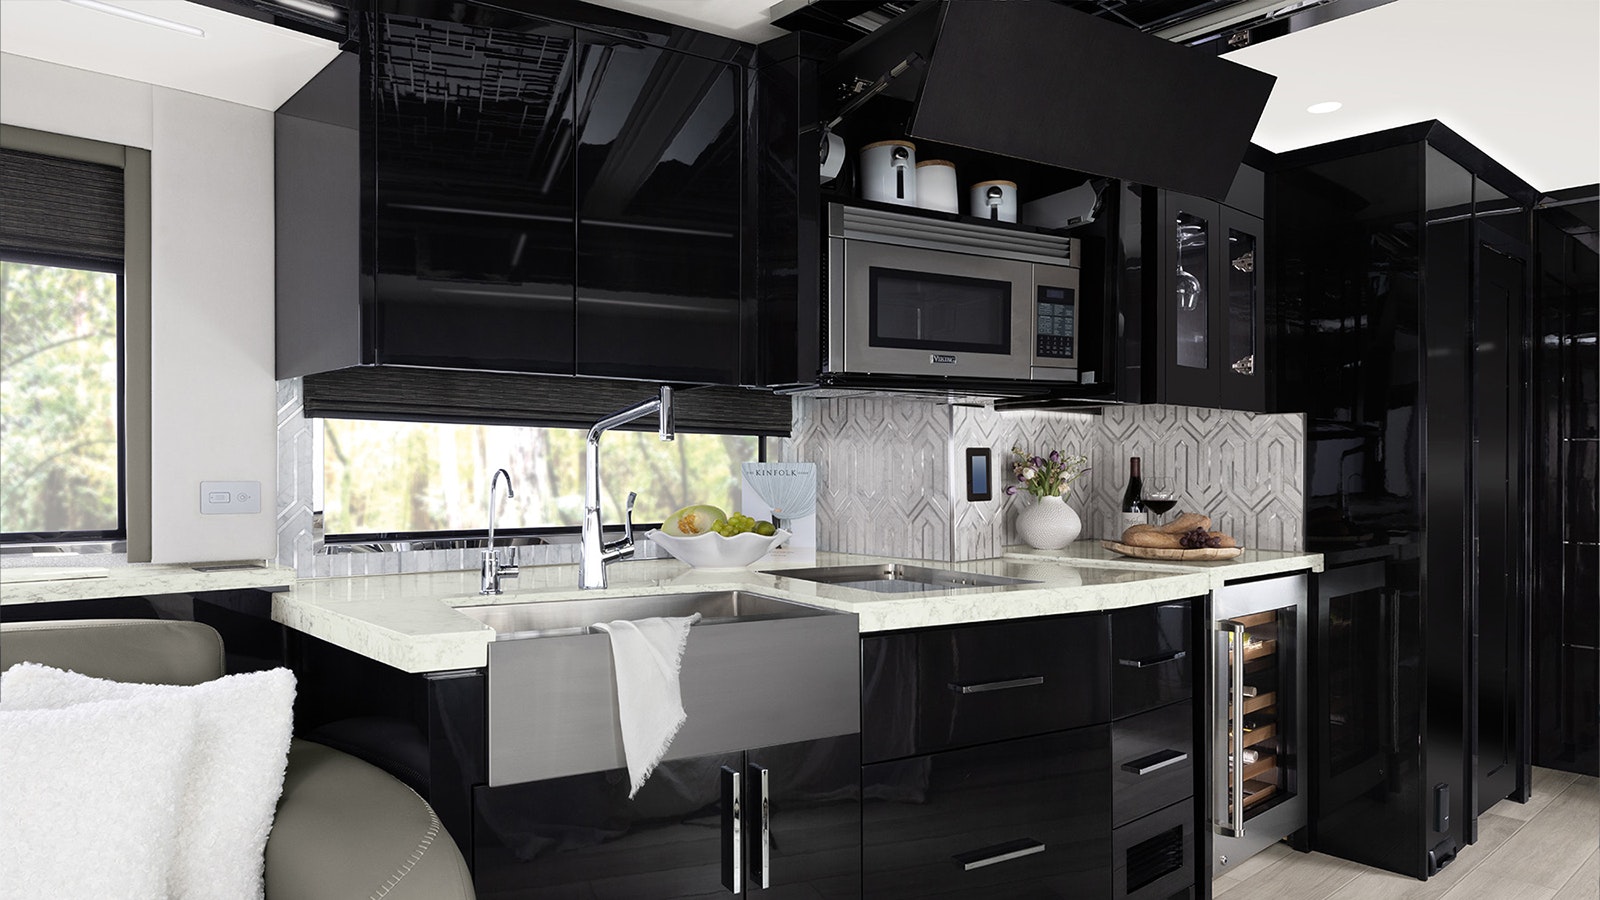 A full kitchen with full-sized appliances.